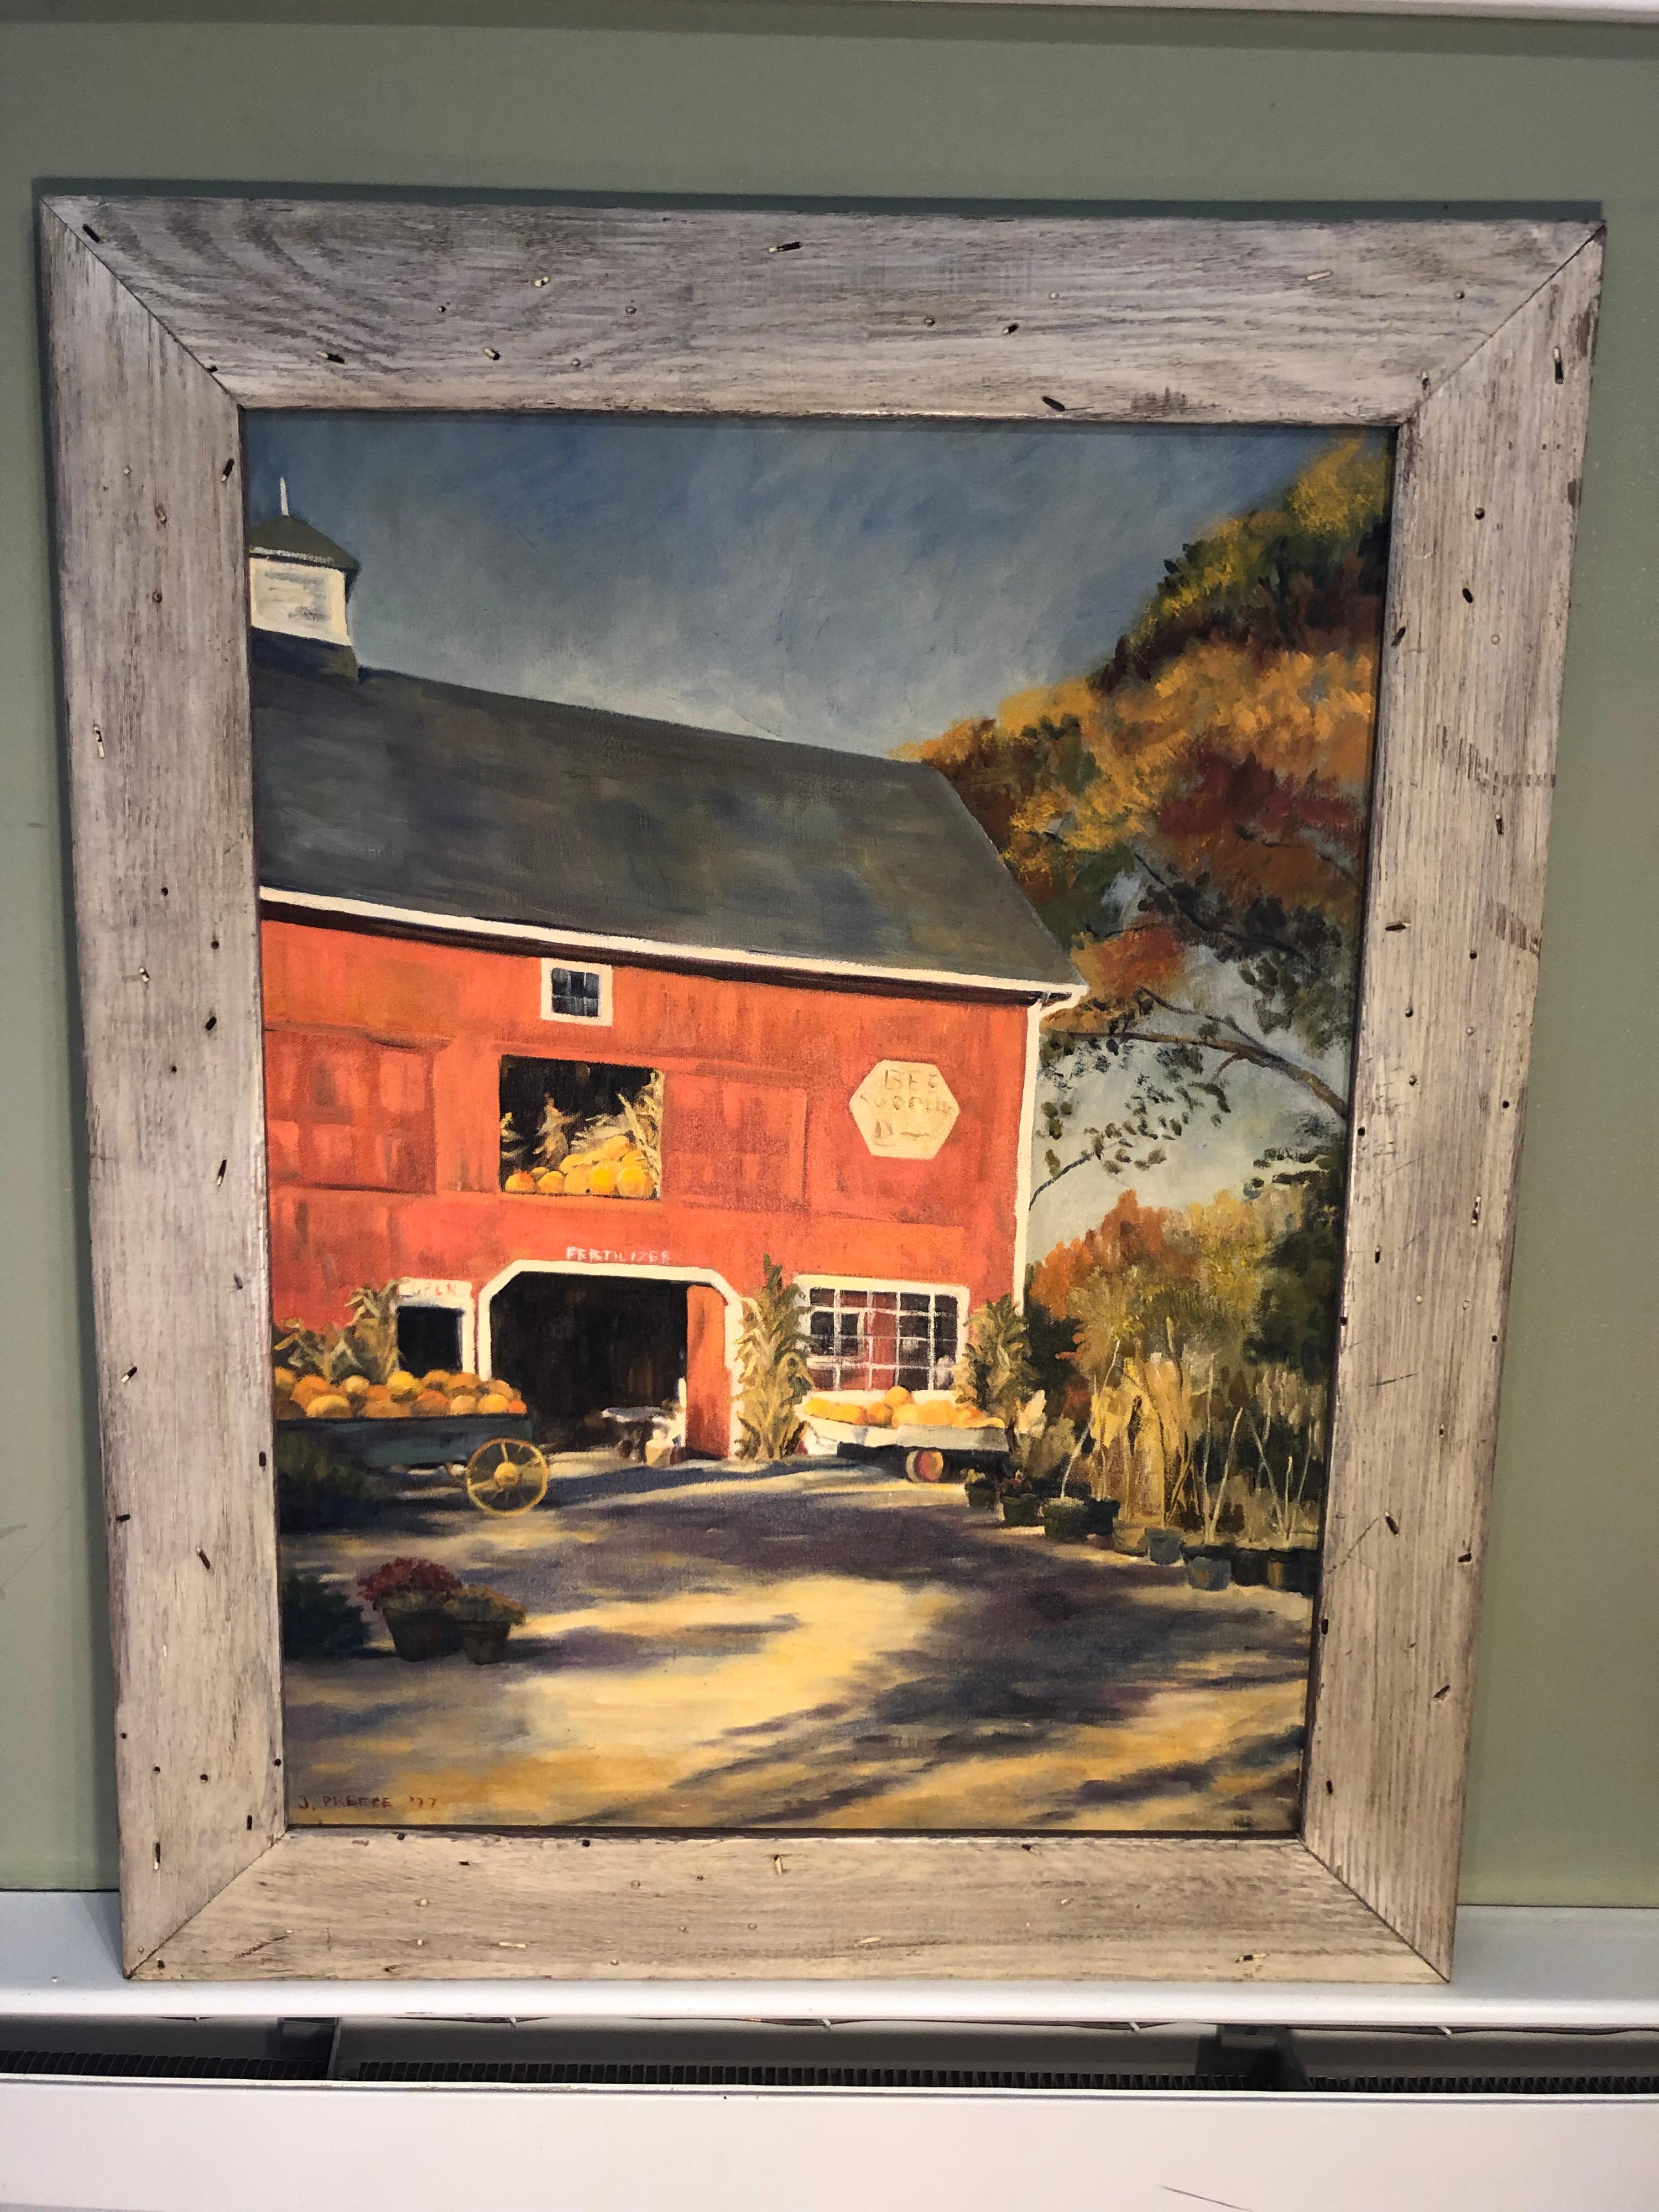 1977 oil on canvas of Autumn landscape with red barn by J. Preece. Bucolic country farm scene with traditional red barn nursery. Potted trees ,bales of hay and carts full of pumpkins make up this composition. Sign on buildings suggests they sell bee